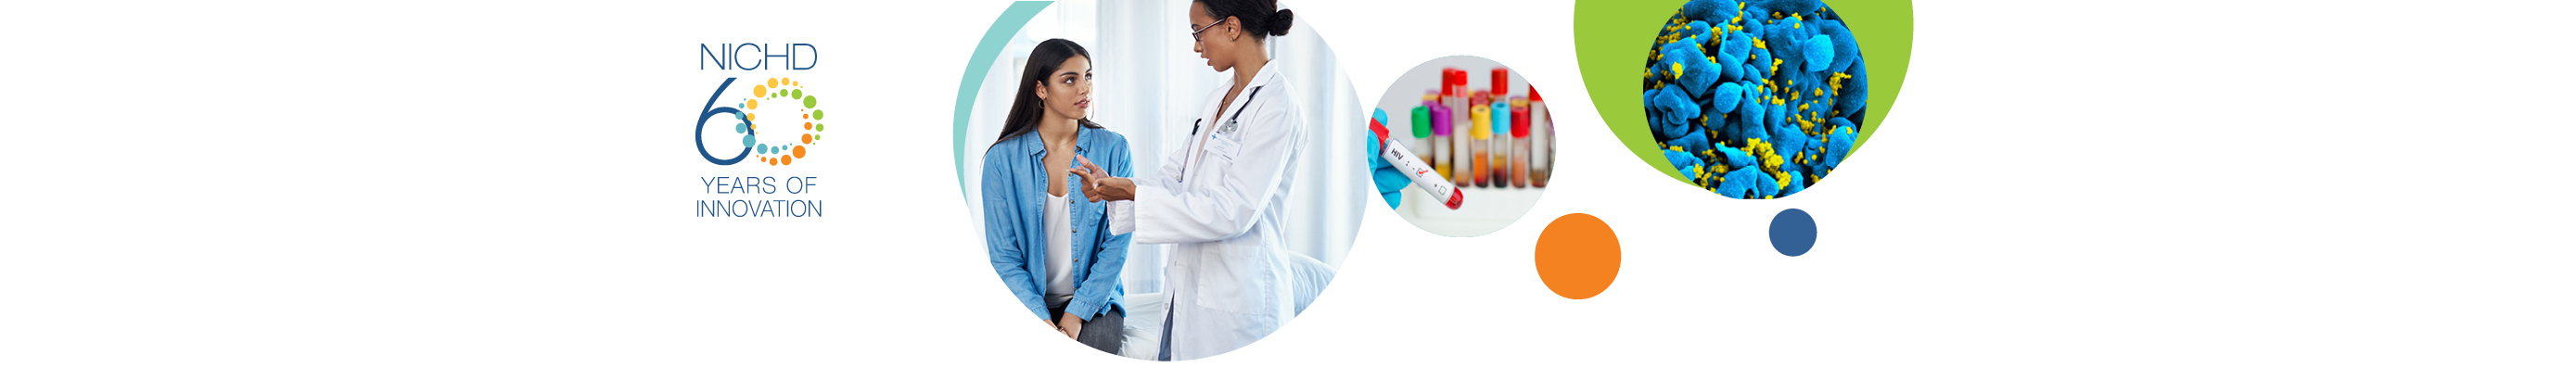 The NICHD 60th Anniversary logo (far left) alongside a series of three images relating to HIV/AIDS research on women and children, including a woman talking to a healthcare provider (left), a gloved hand holding a test tube (middle), and a lab image of an HIV-infected H9 T-cell (right).